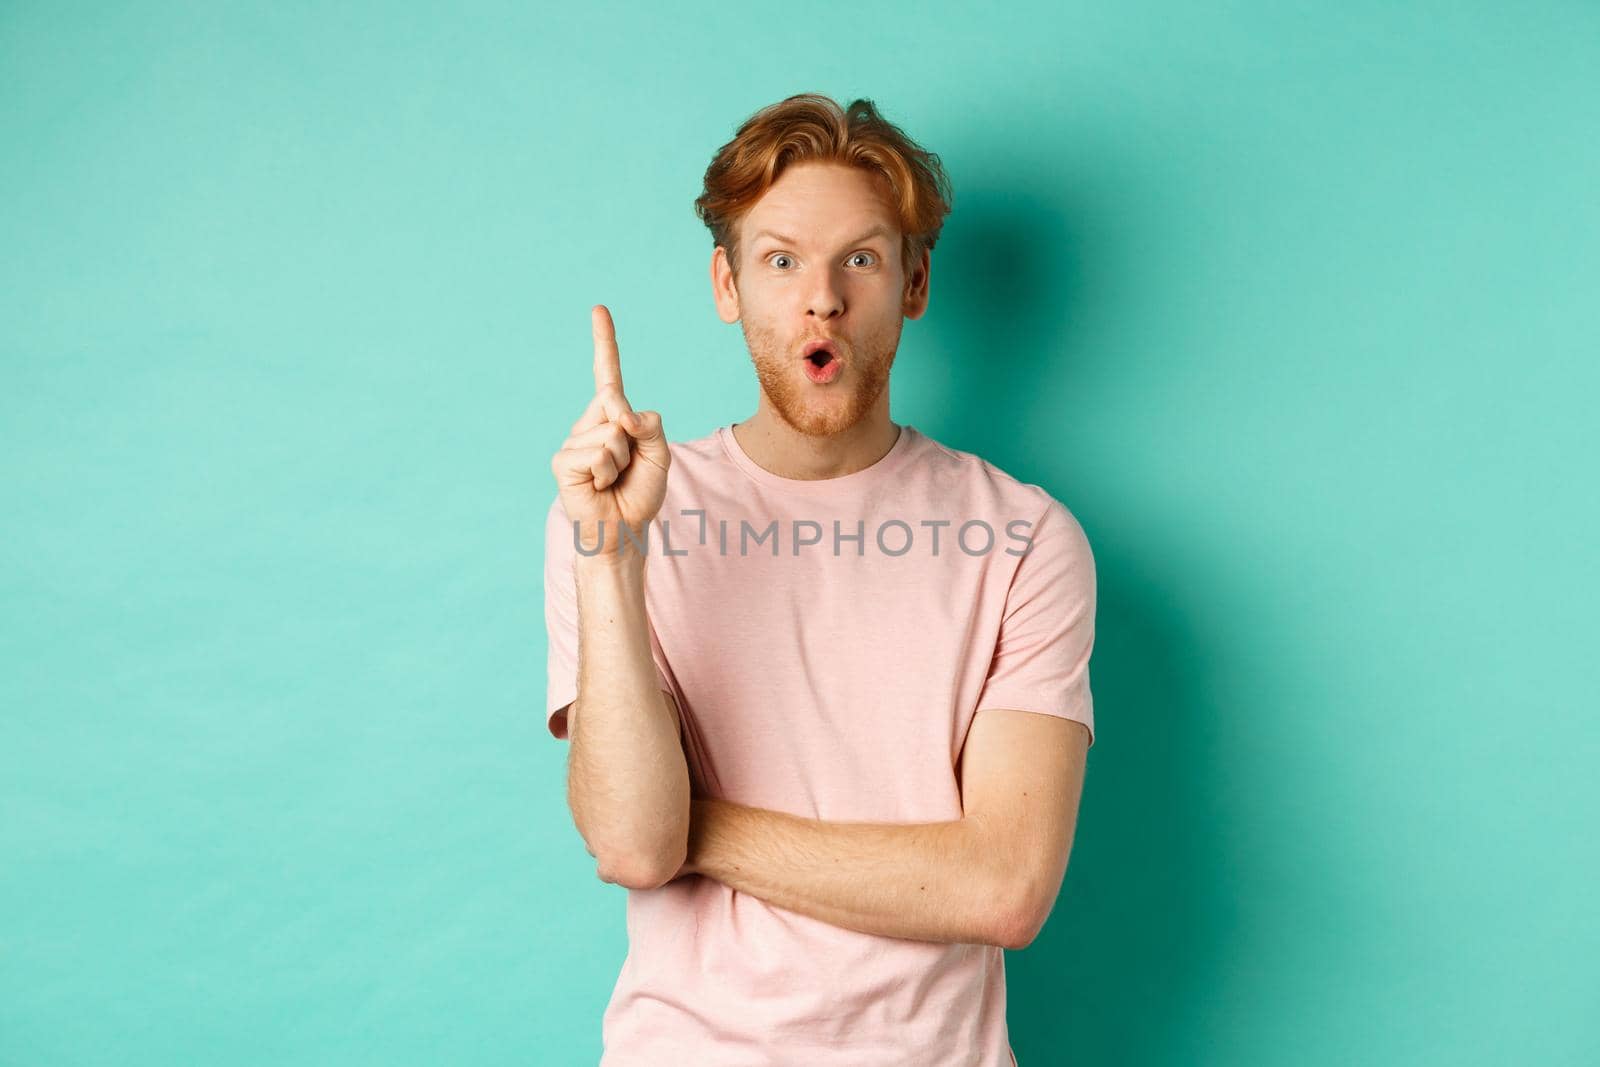 Pensive redhead man in t-shirt raising index finger, gasping as pitching at idea, saying suggestion, standing over turquoise background. Copy space